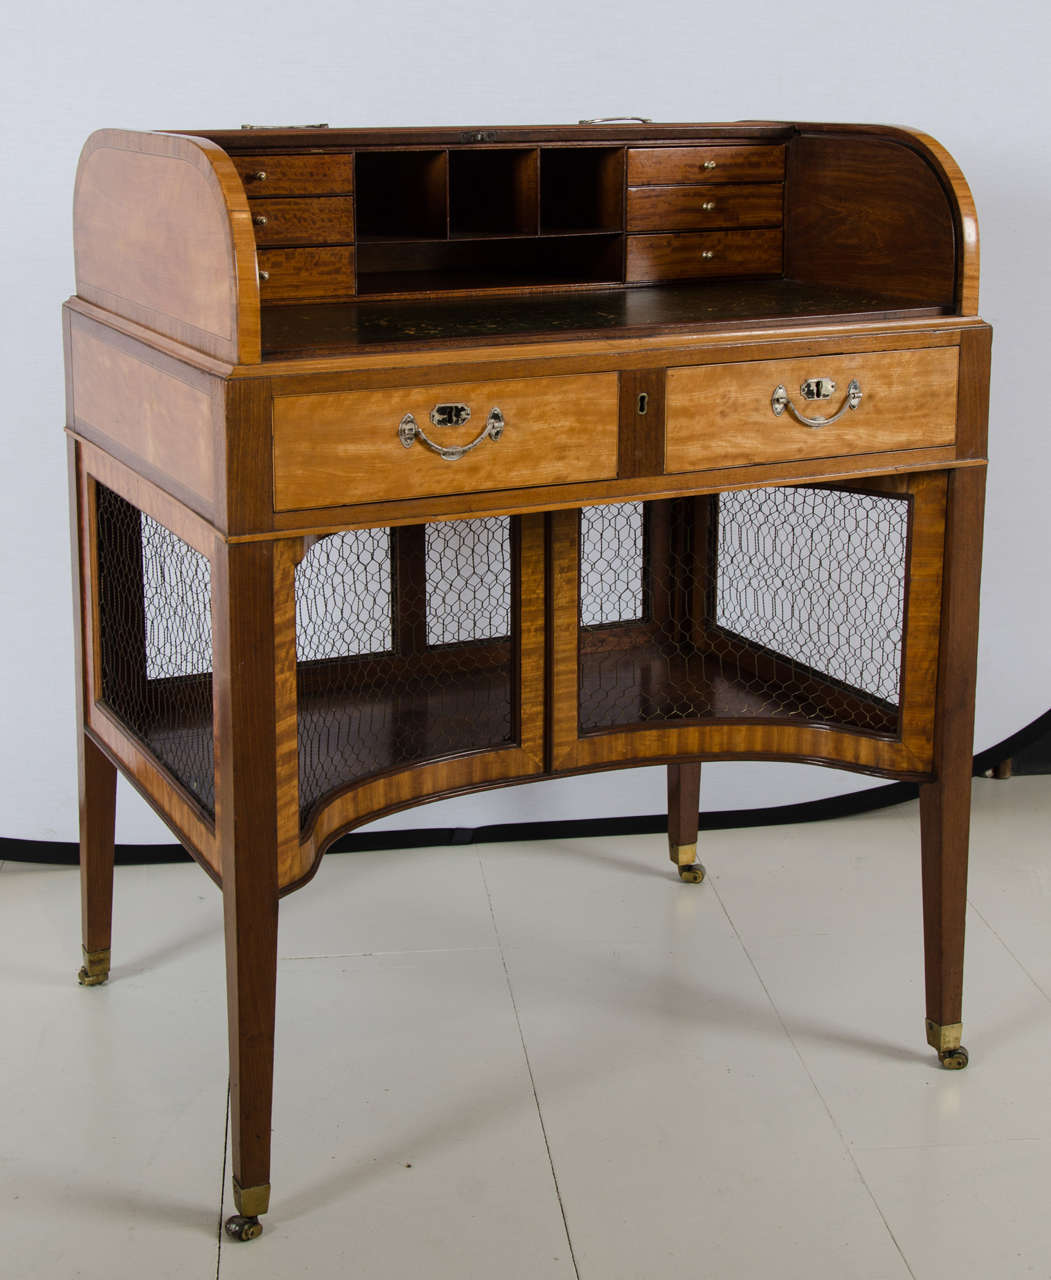 Sheraton mahogany and satinwood roll top ladies writing desk with an enclosed shelf below, accessed by concave doors. Silver hardware.